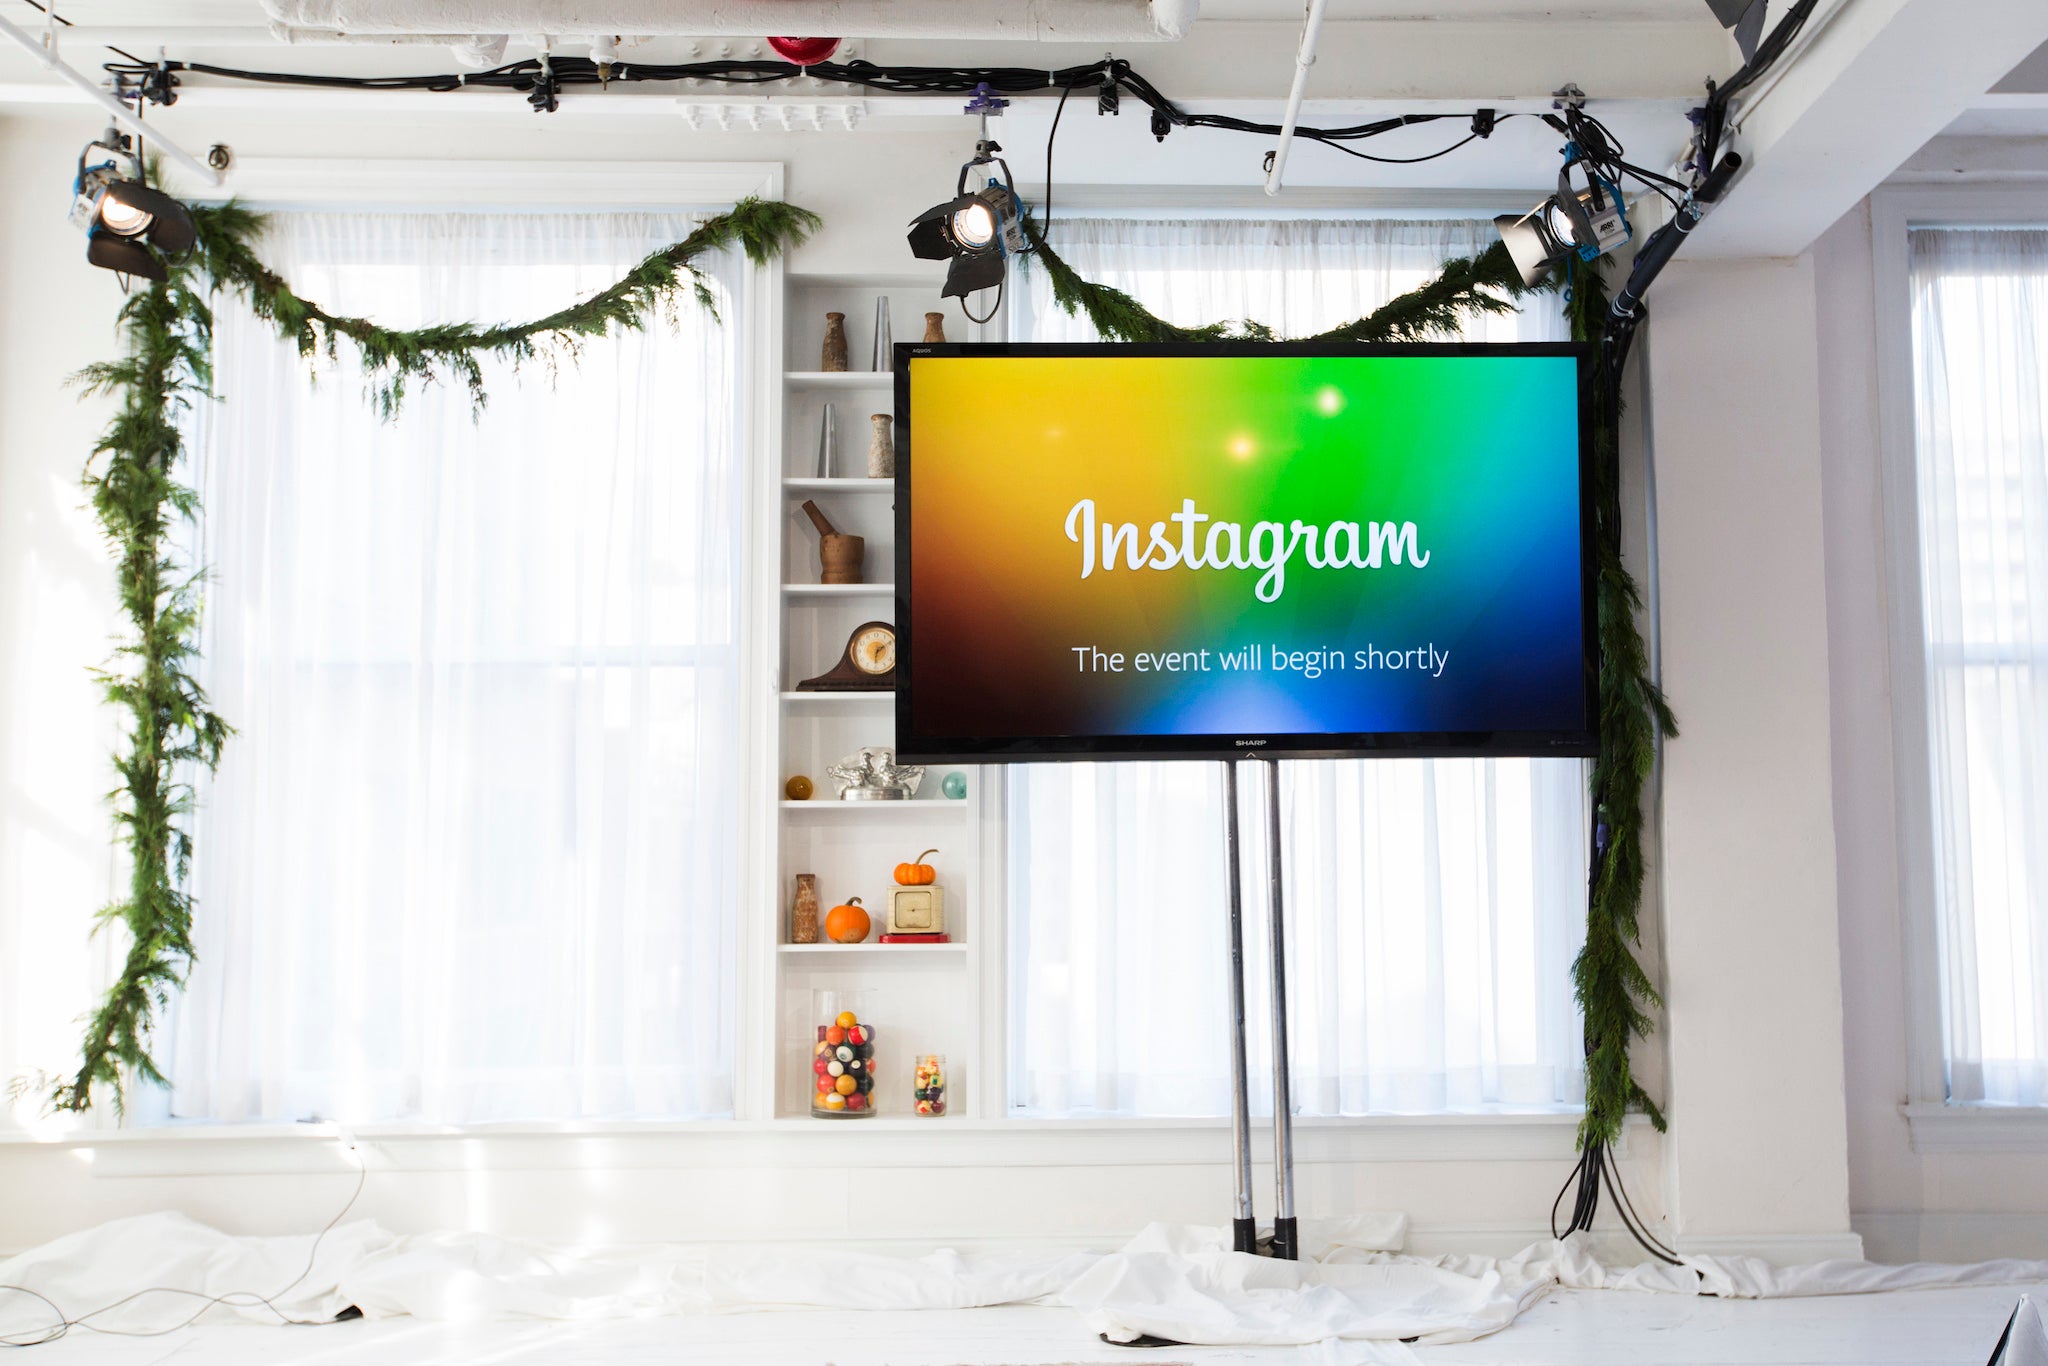 Instagram has more than 200,000 advertisers compared with Twitter's 130,000.